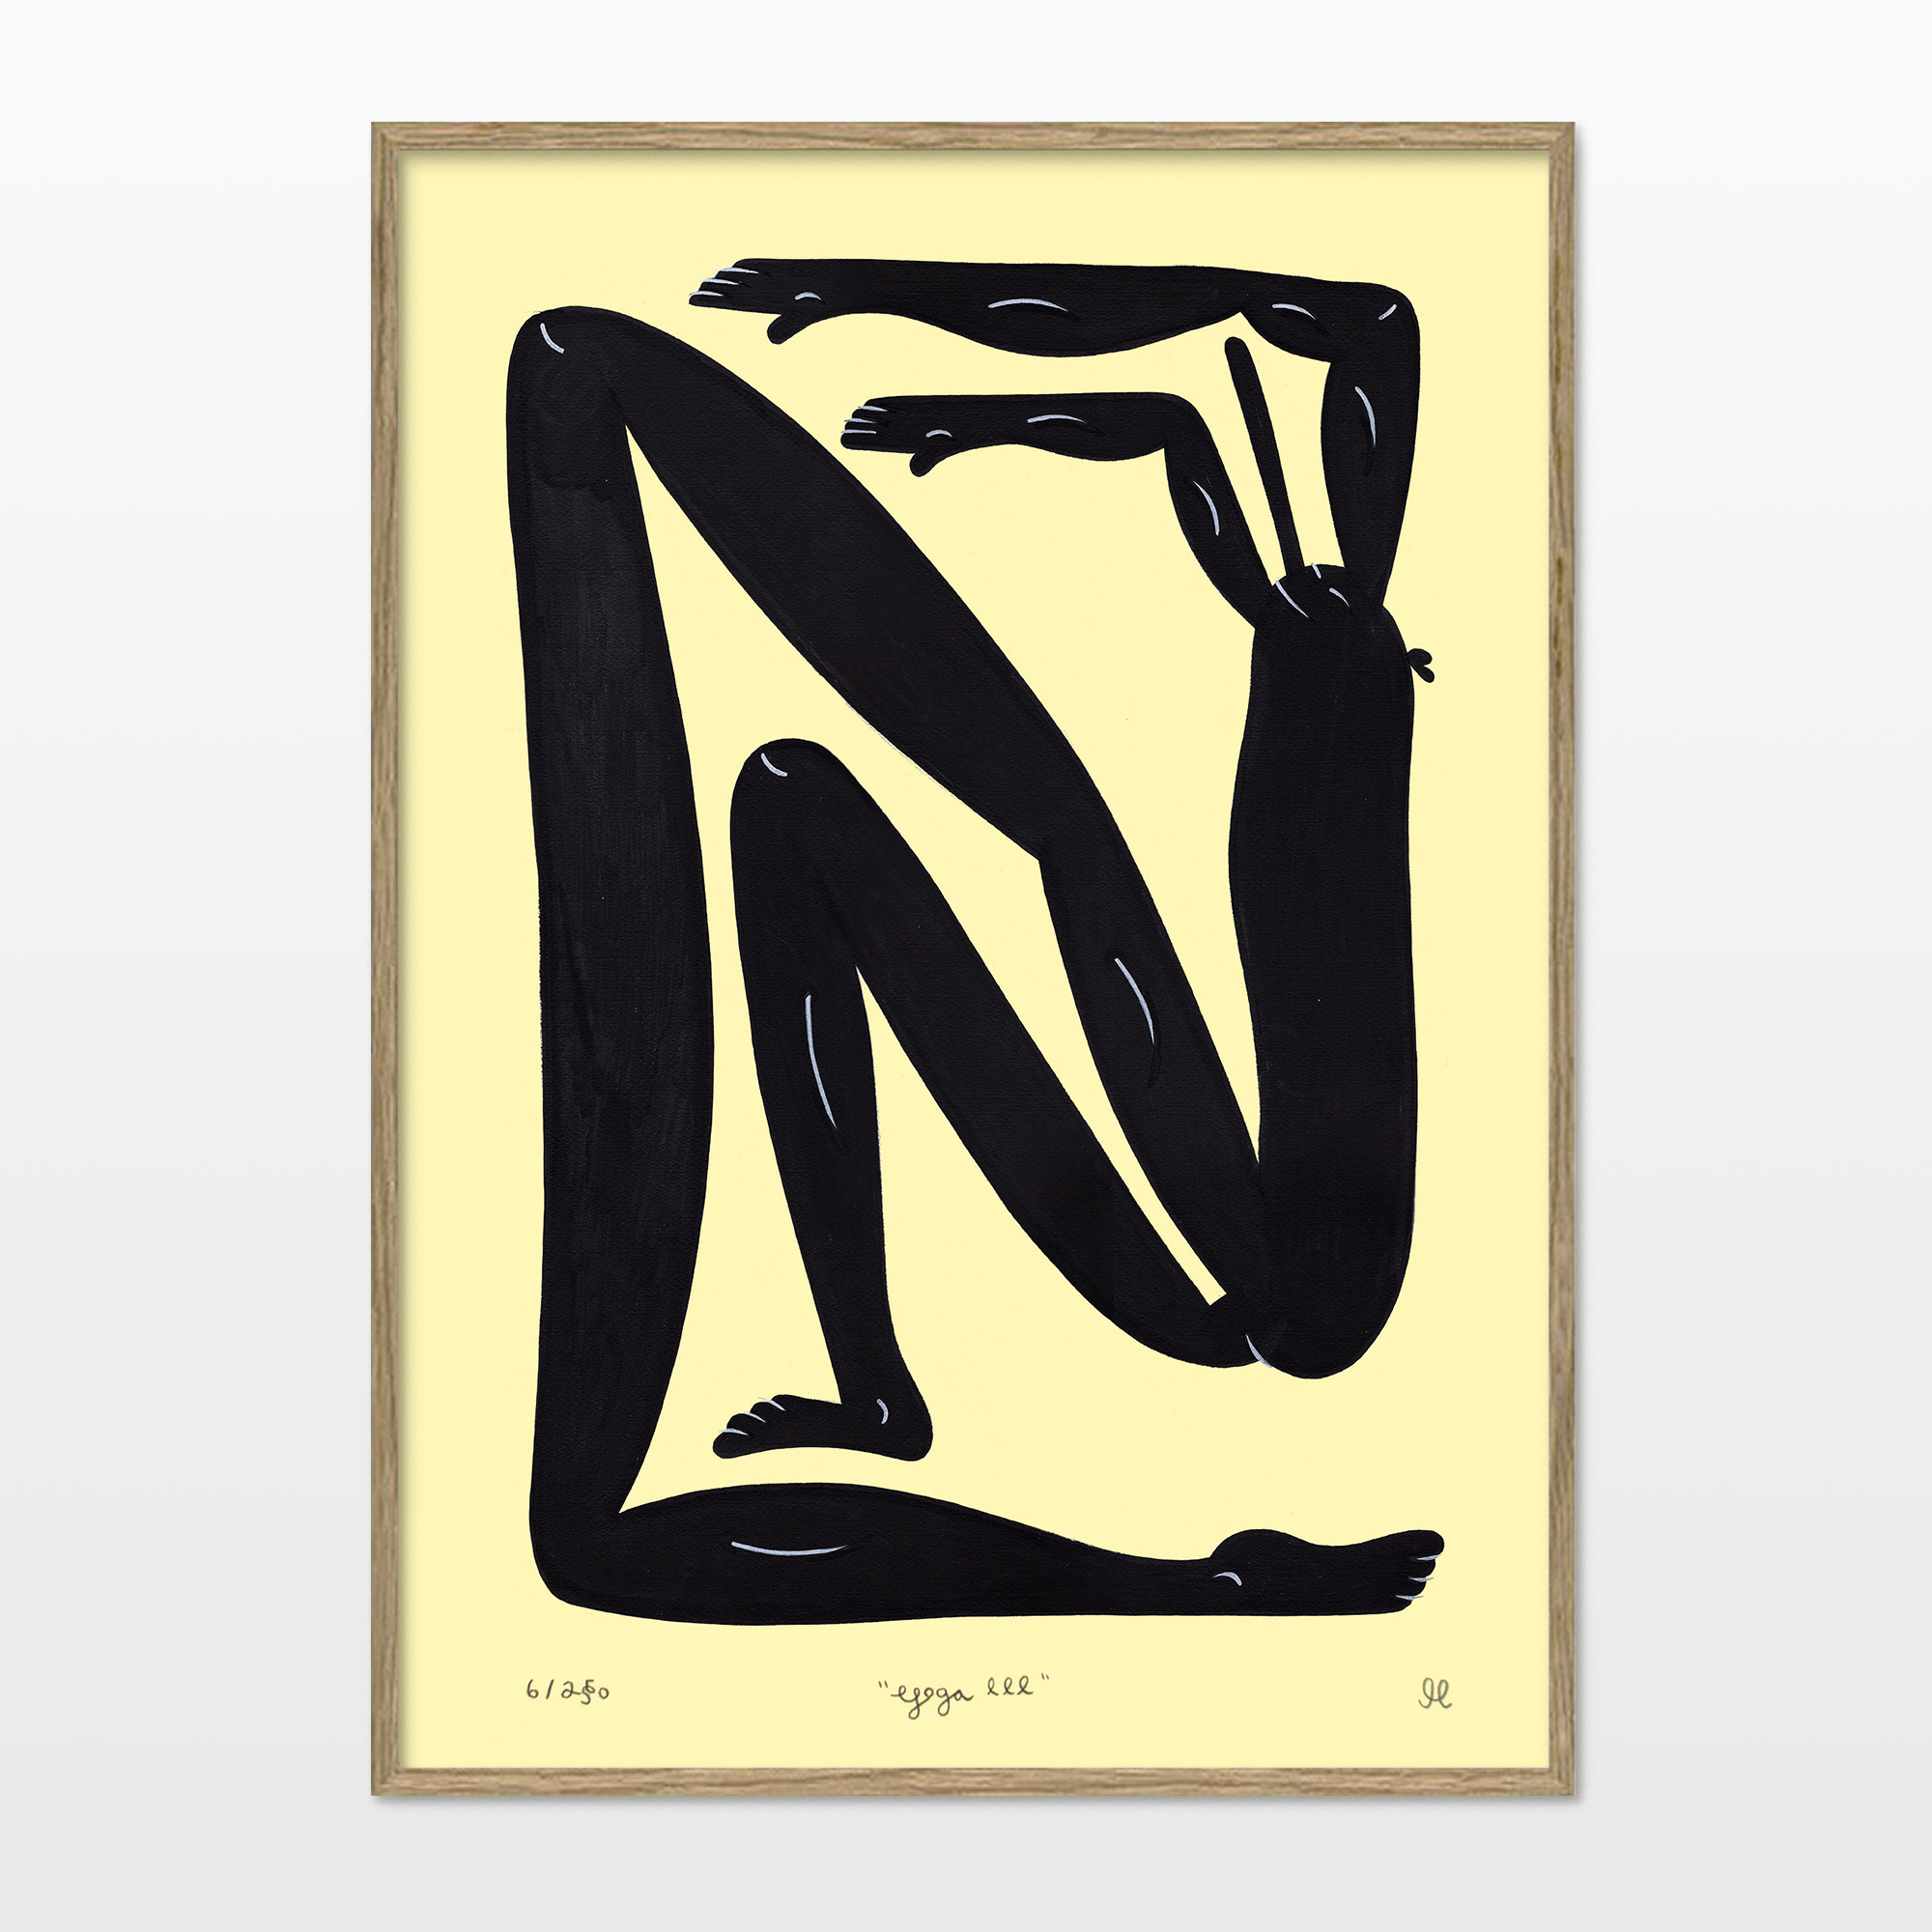 posters-prints, giclee-print, family-friendly, figurative, graphical, illustrative, monochrome, pop, bodies, cartoons, humor, movement, people, beige, black, ink, paper, amusing, contemporary-art, danish, decorative, design, interior, interior-design, modern, modern-art, nordic, posters, prints, scandinavien, Buy original high quality art. Paintings, drawings, limited edition prints & posters by talented artists.